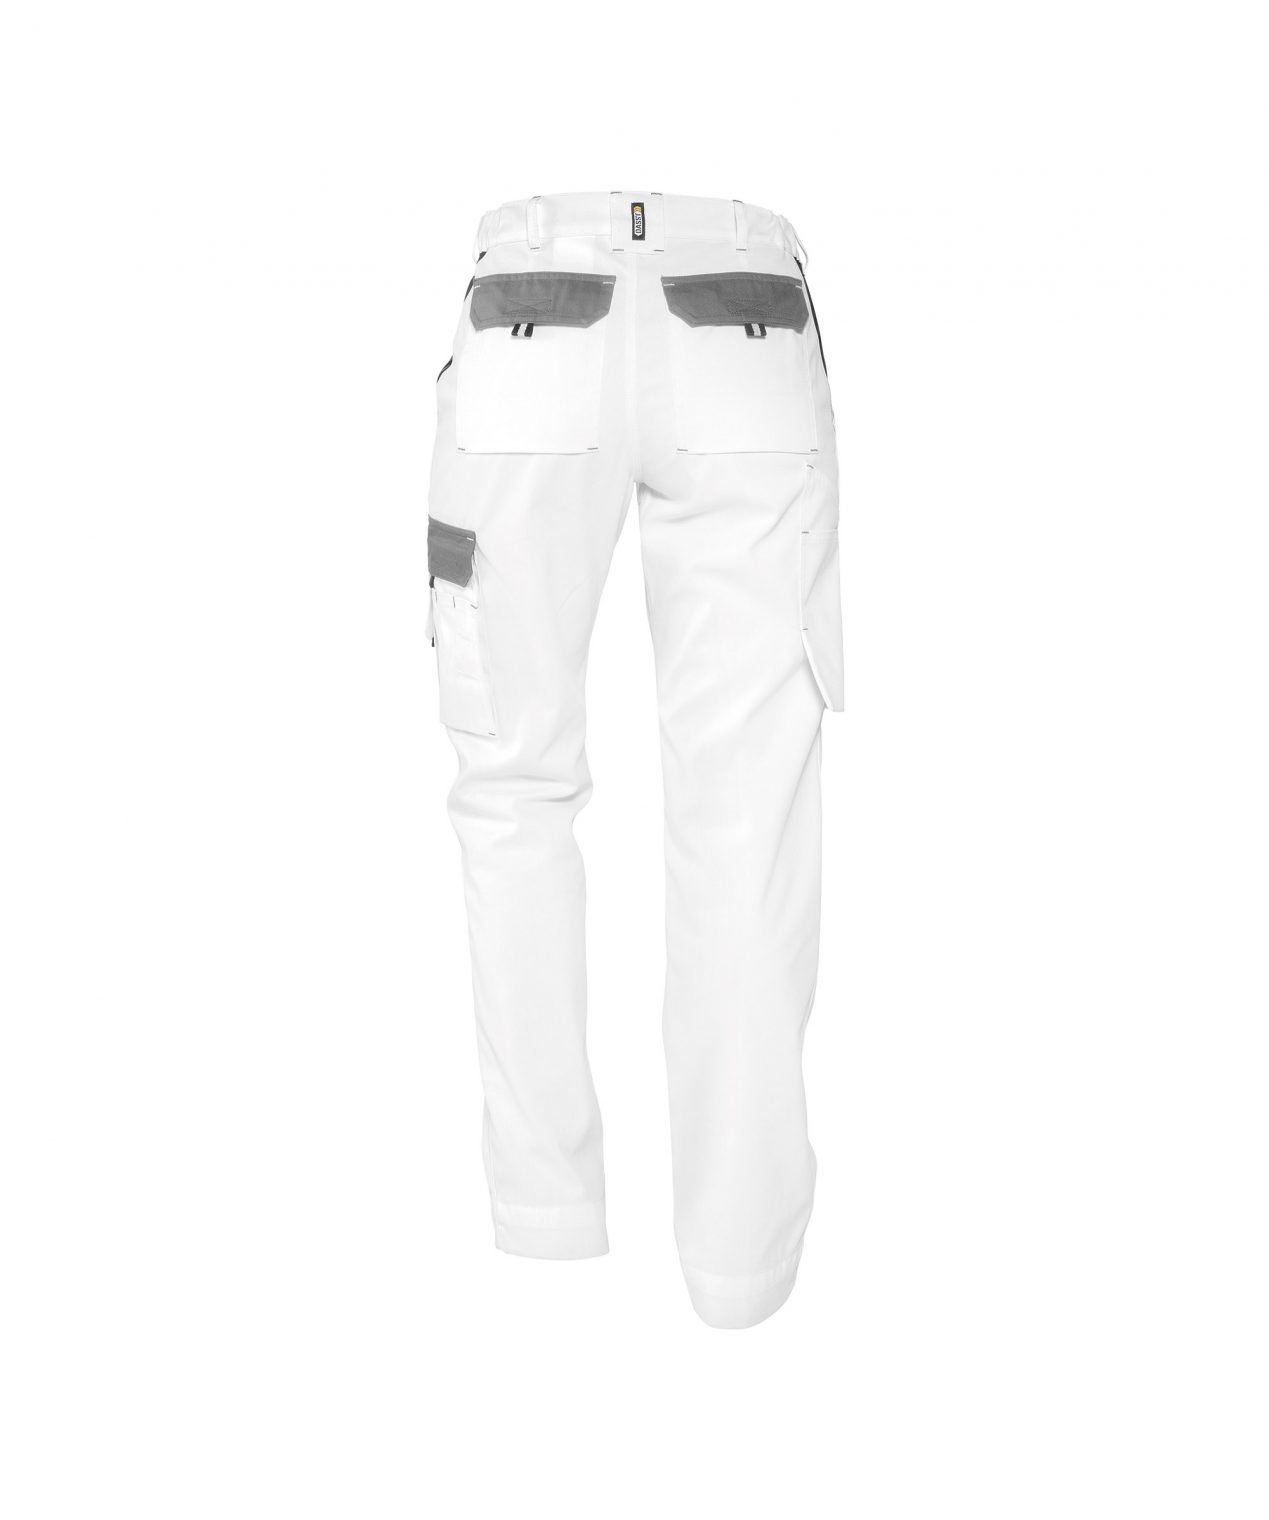 nashville women two tone work trousers white cement grey back